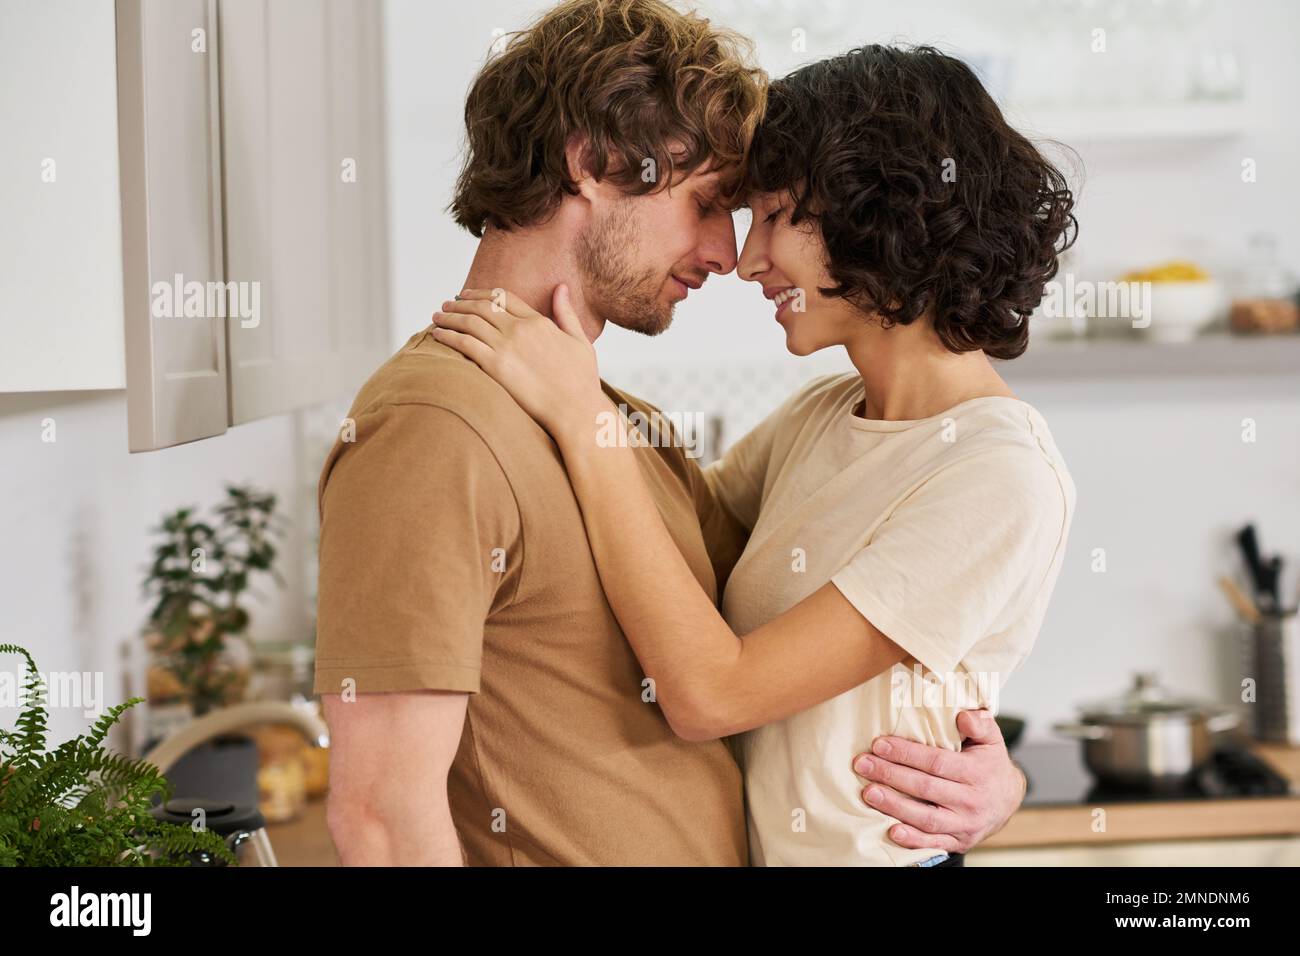 Side view of young amorous husband and wife touching by their foreheads and noses while woman keeping hands on shoulders of her husband Stock Photo